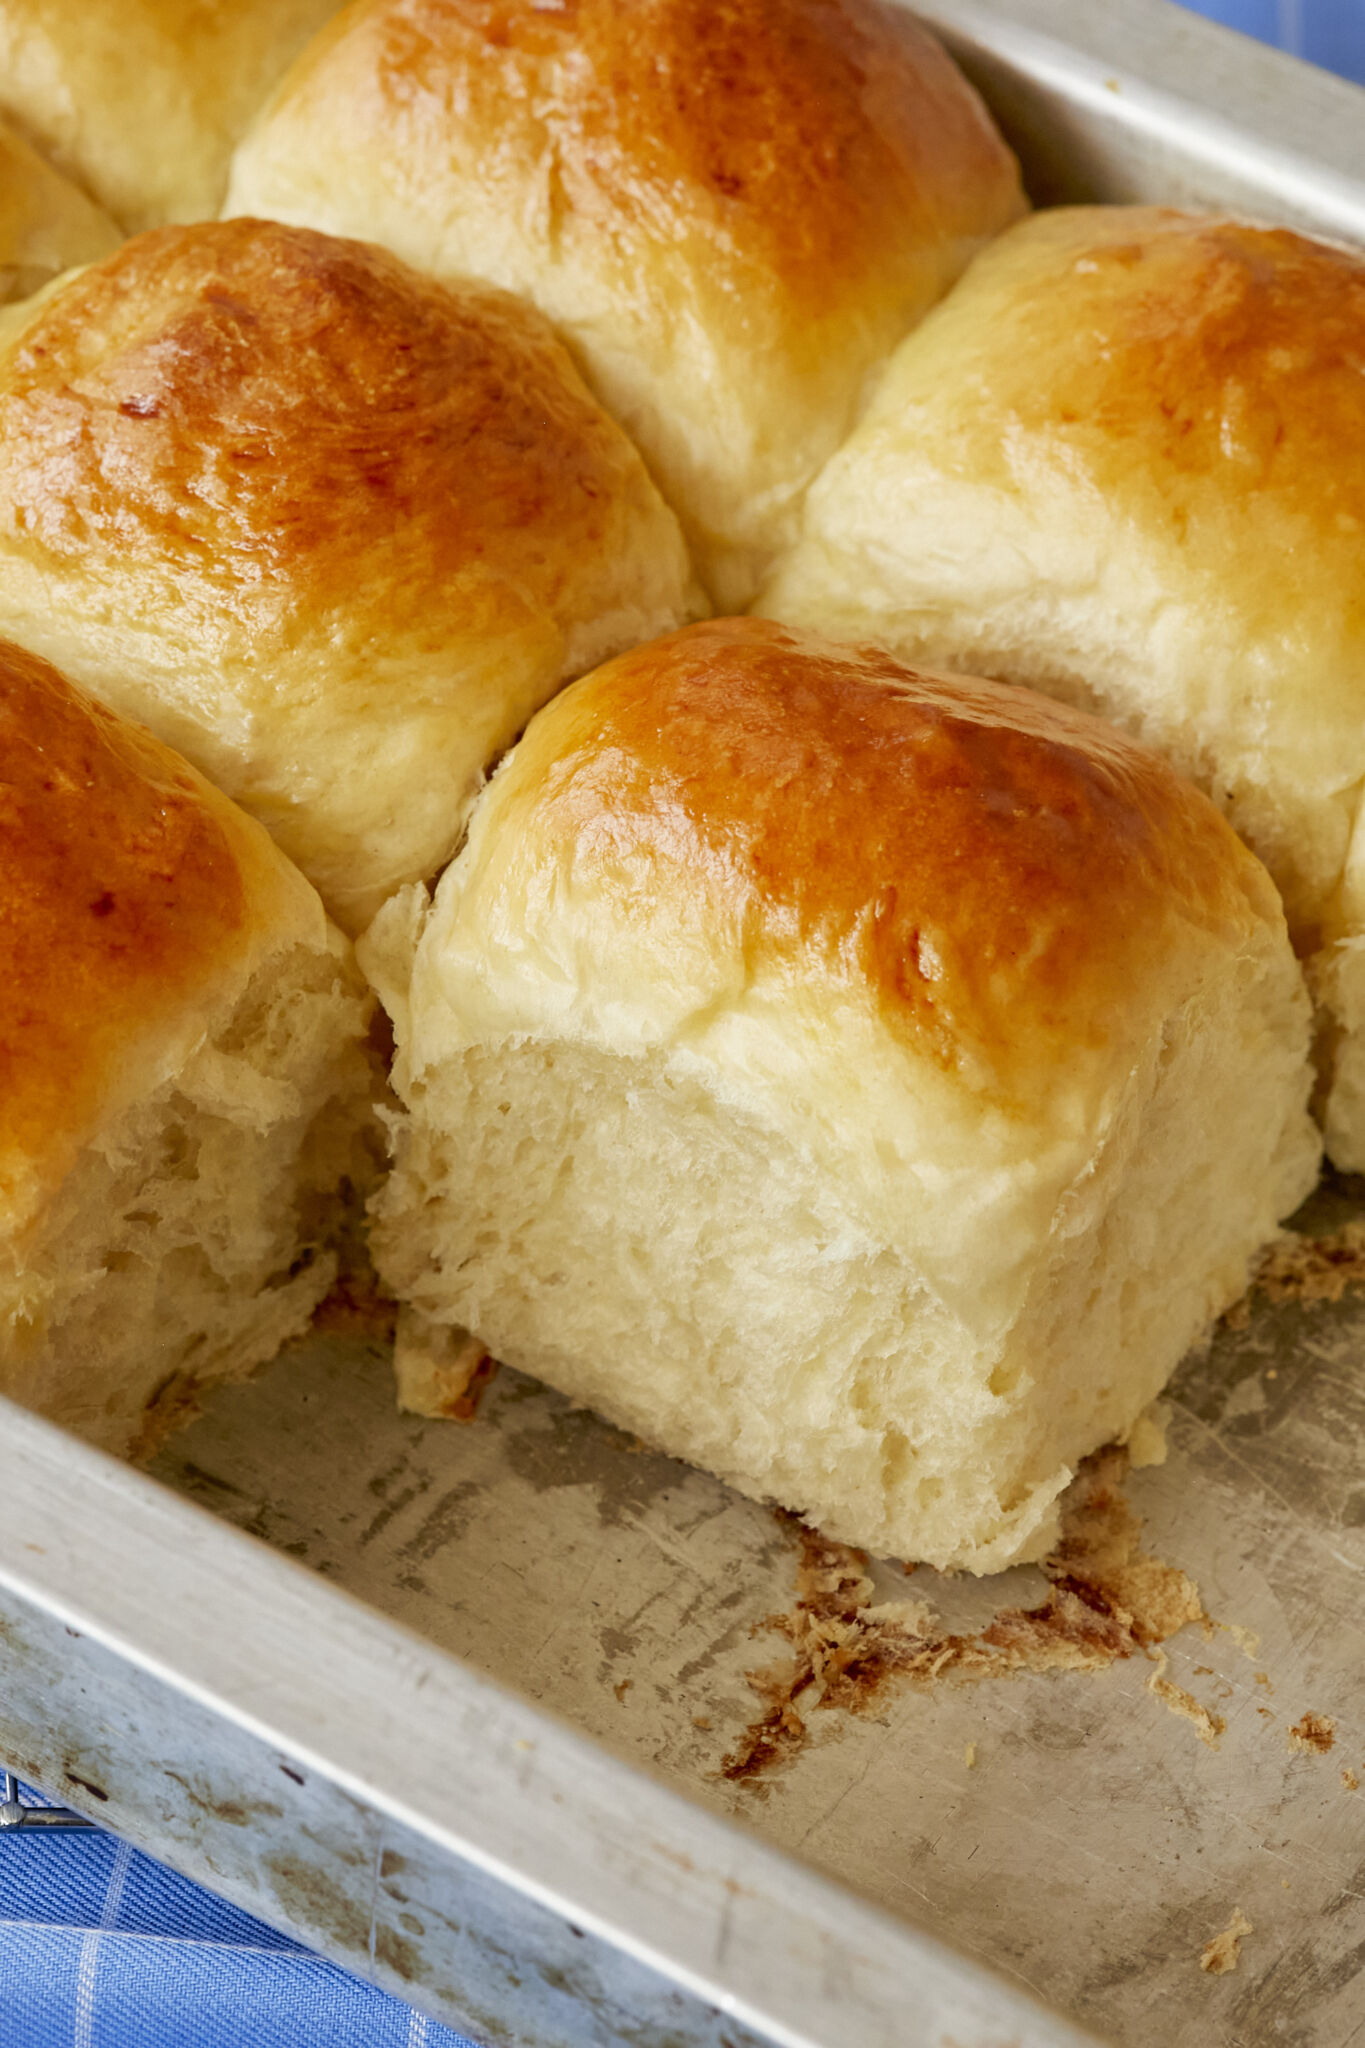 Insanely Fluffy Mashed Potato Dinner Rolls are baked until golden brown on top in a deep metal baking pan. The rolls are very soft and fluffy. 